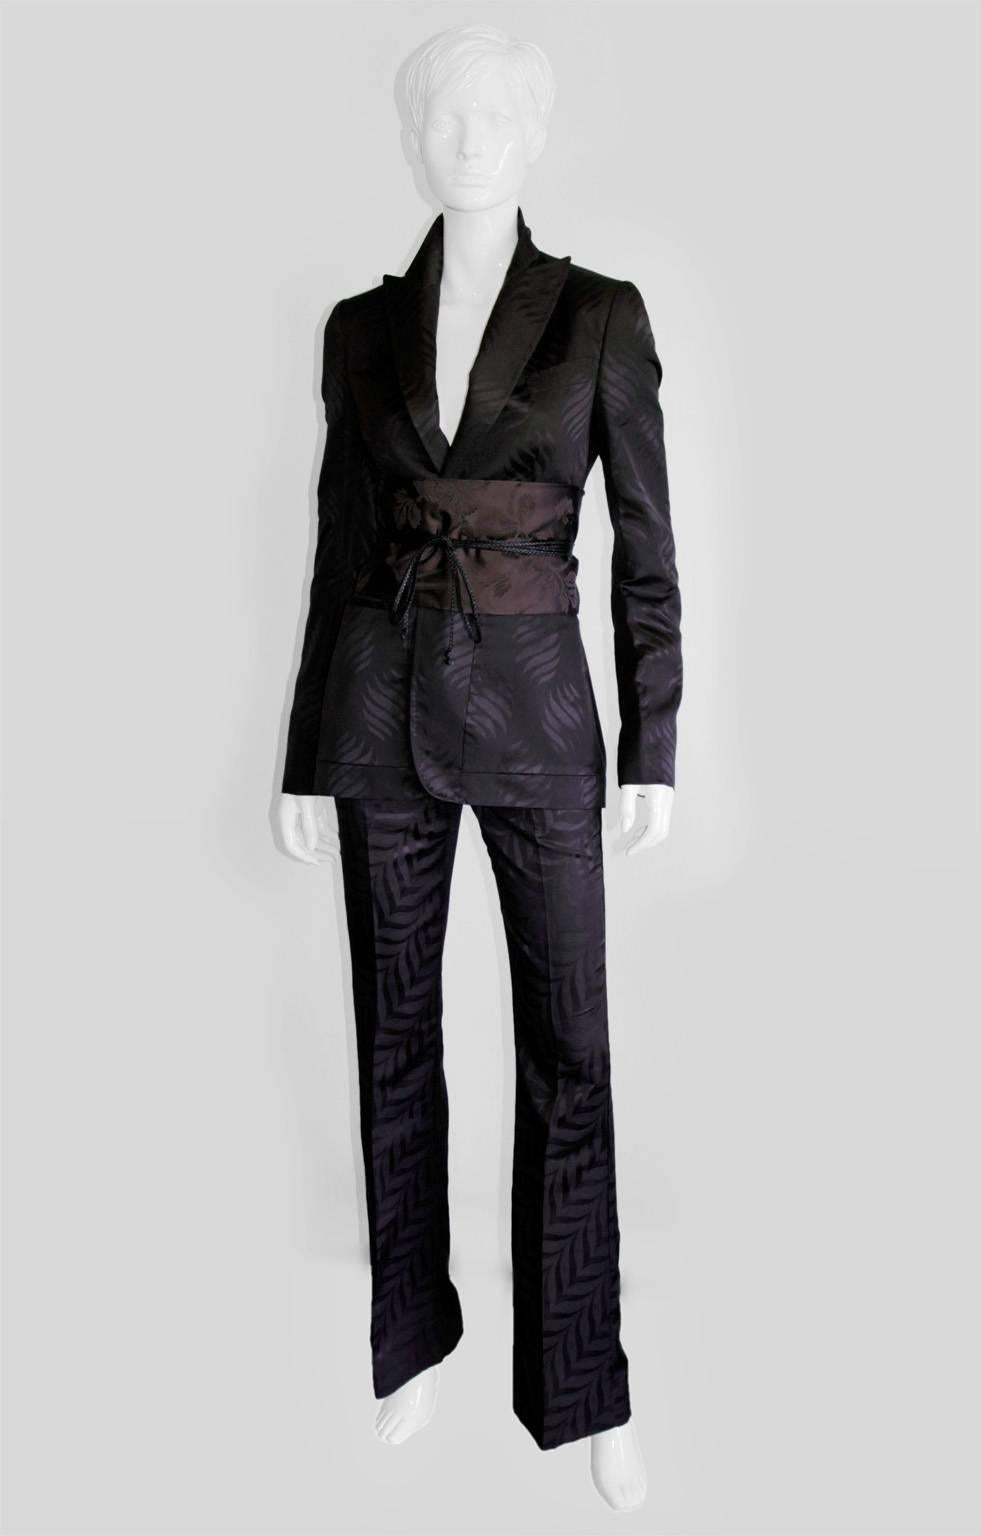 Who could ever forget Tom Ford's fall/winter 2002 Gothic Collection for Gucci... with that dark chinoiseriesque styling & heavenly detailing? Well, this extraordinary pant suit with matching obi belt was one of the absolute 